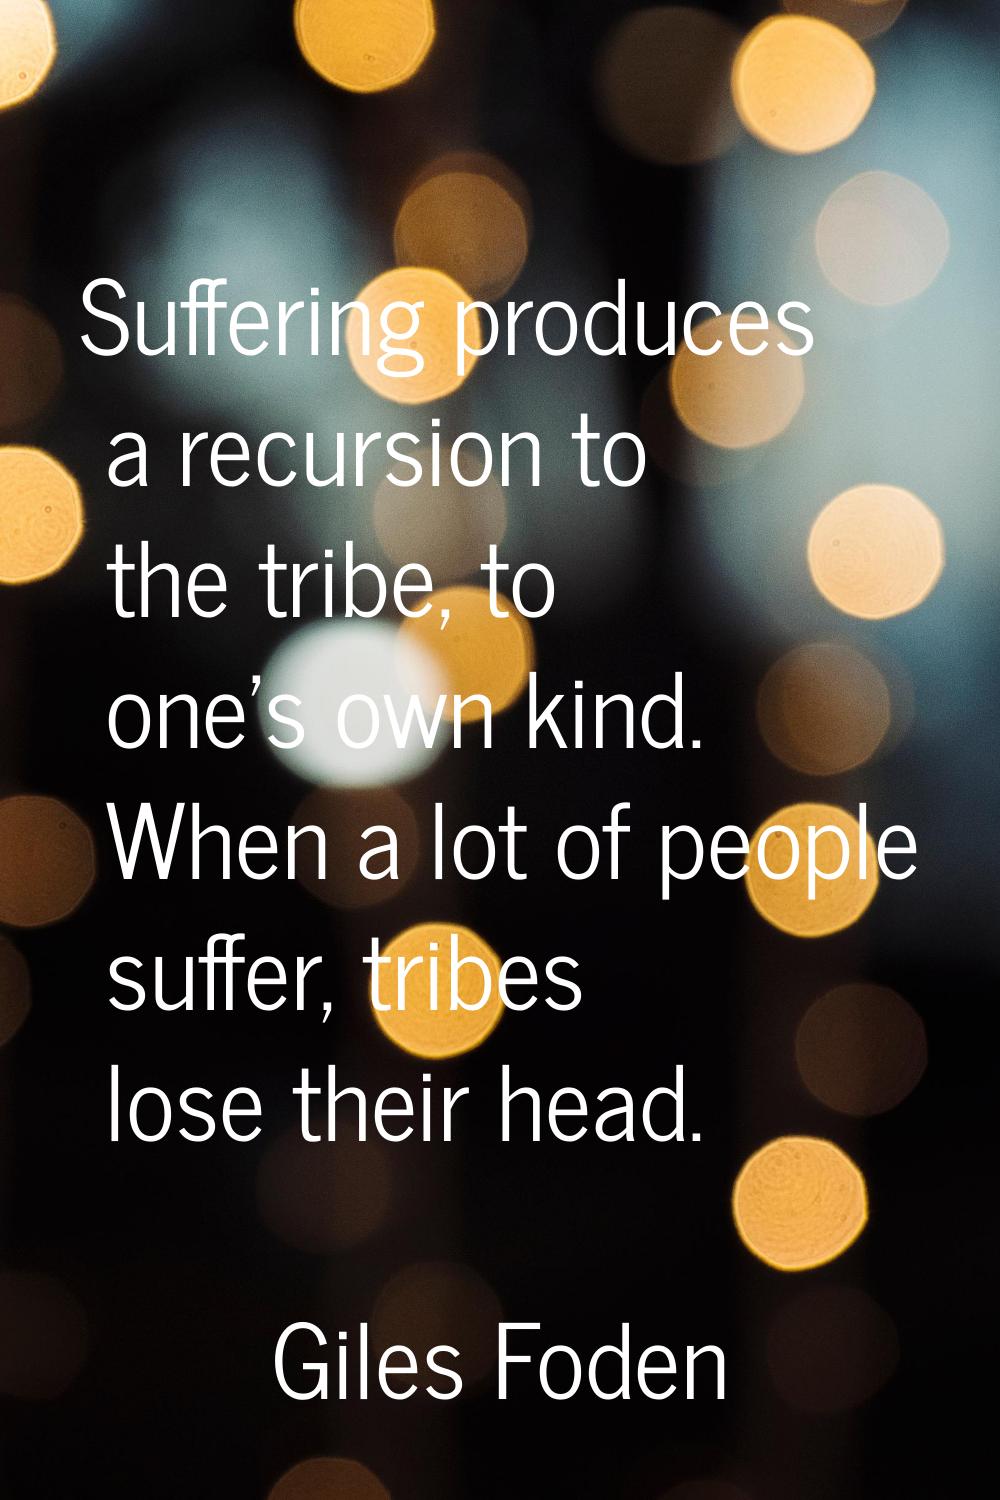 Suffering produces a recursion to the tribe, to one's own kind. When a lot of people suffer, tribes